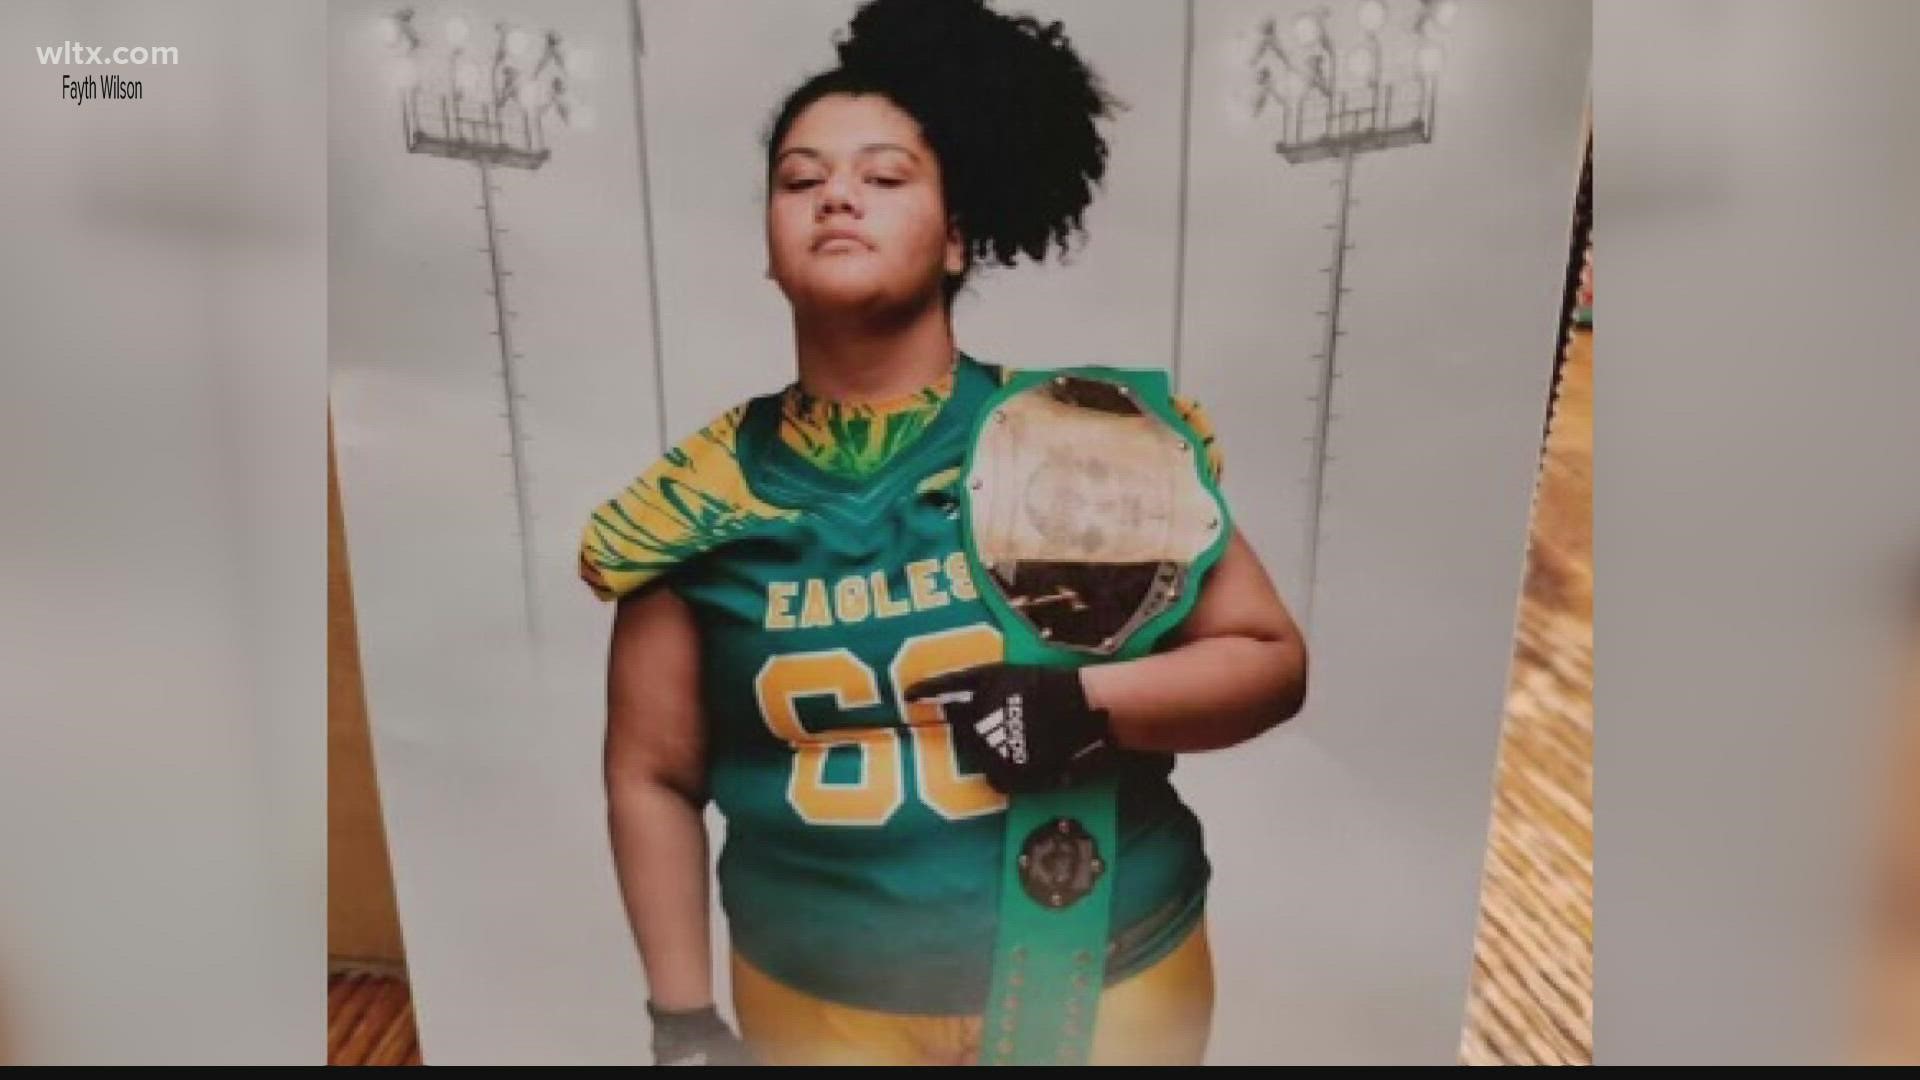 Hopkins Middle School student Lauryn Wilson has made history as the first girl to play on the school's football team and on a winning championship team.